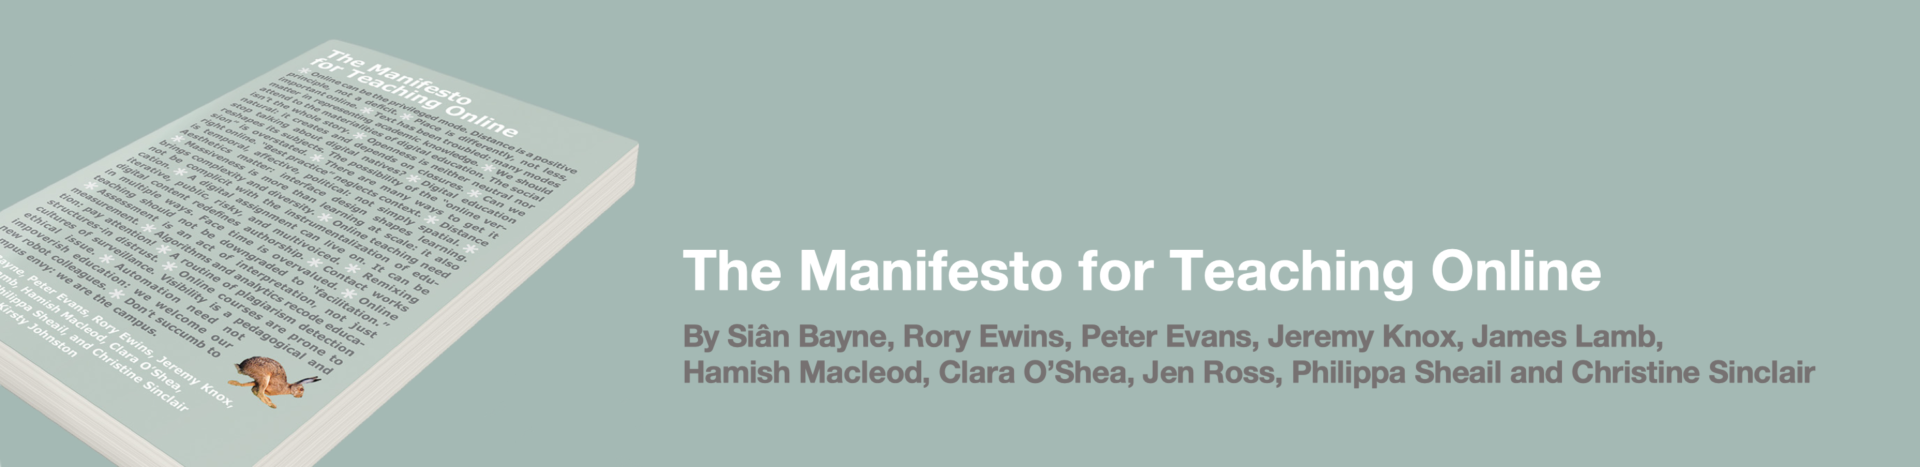 Openness and the new manifesto